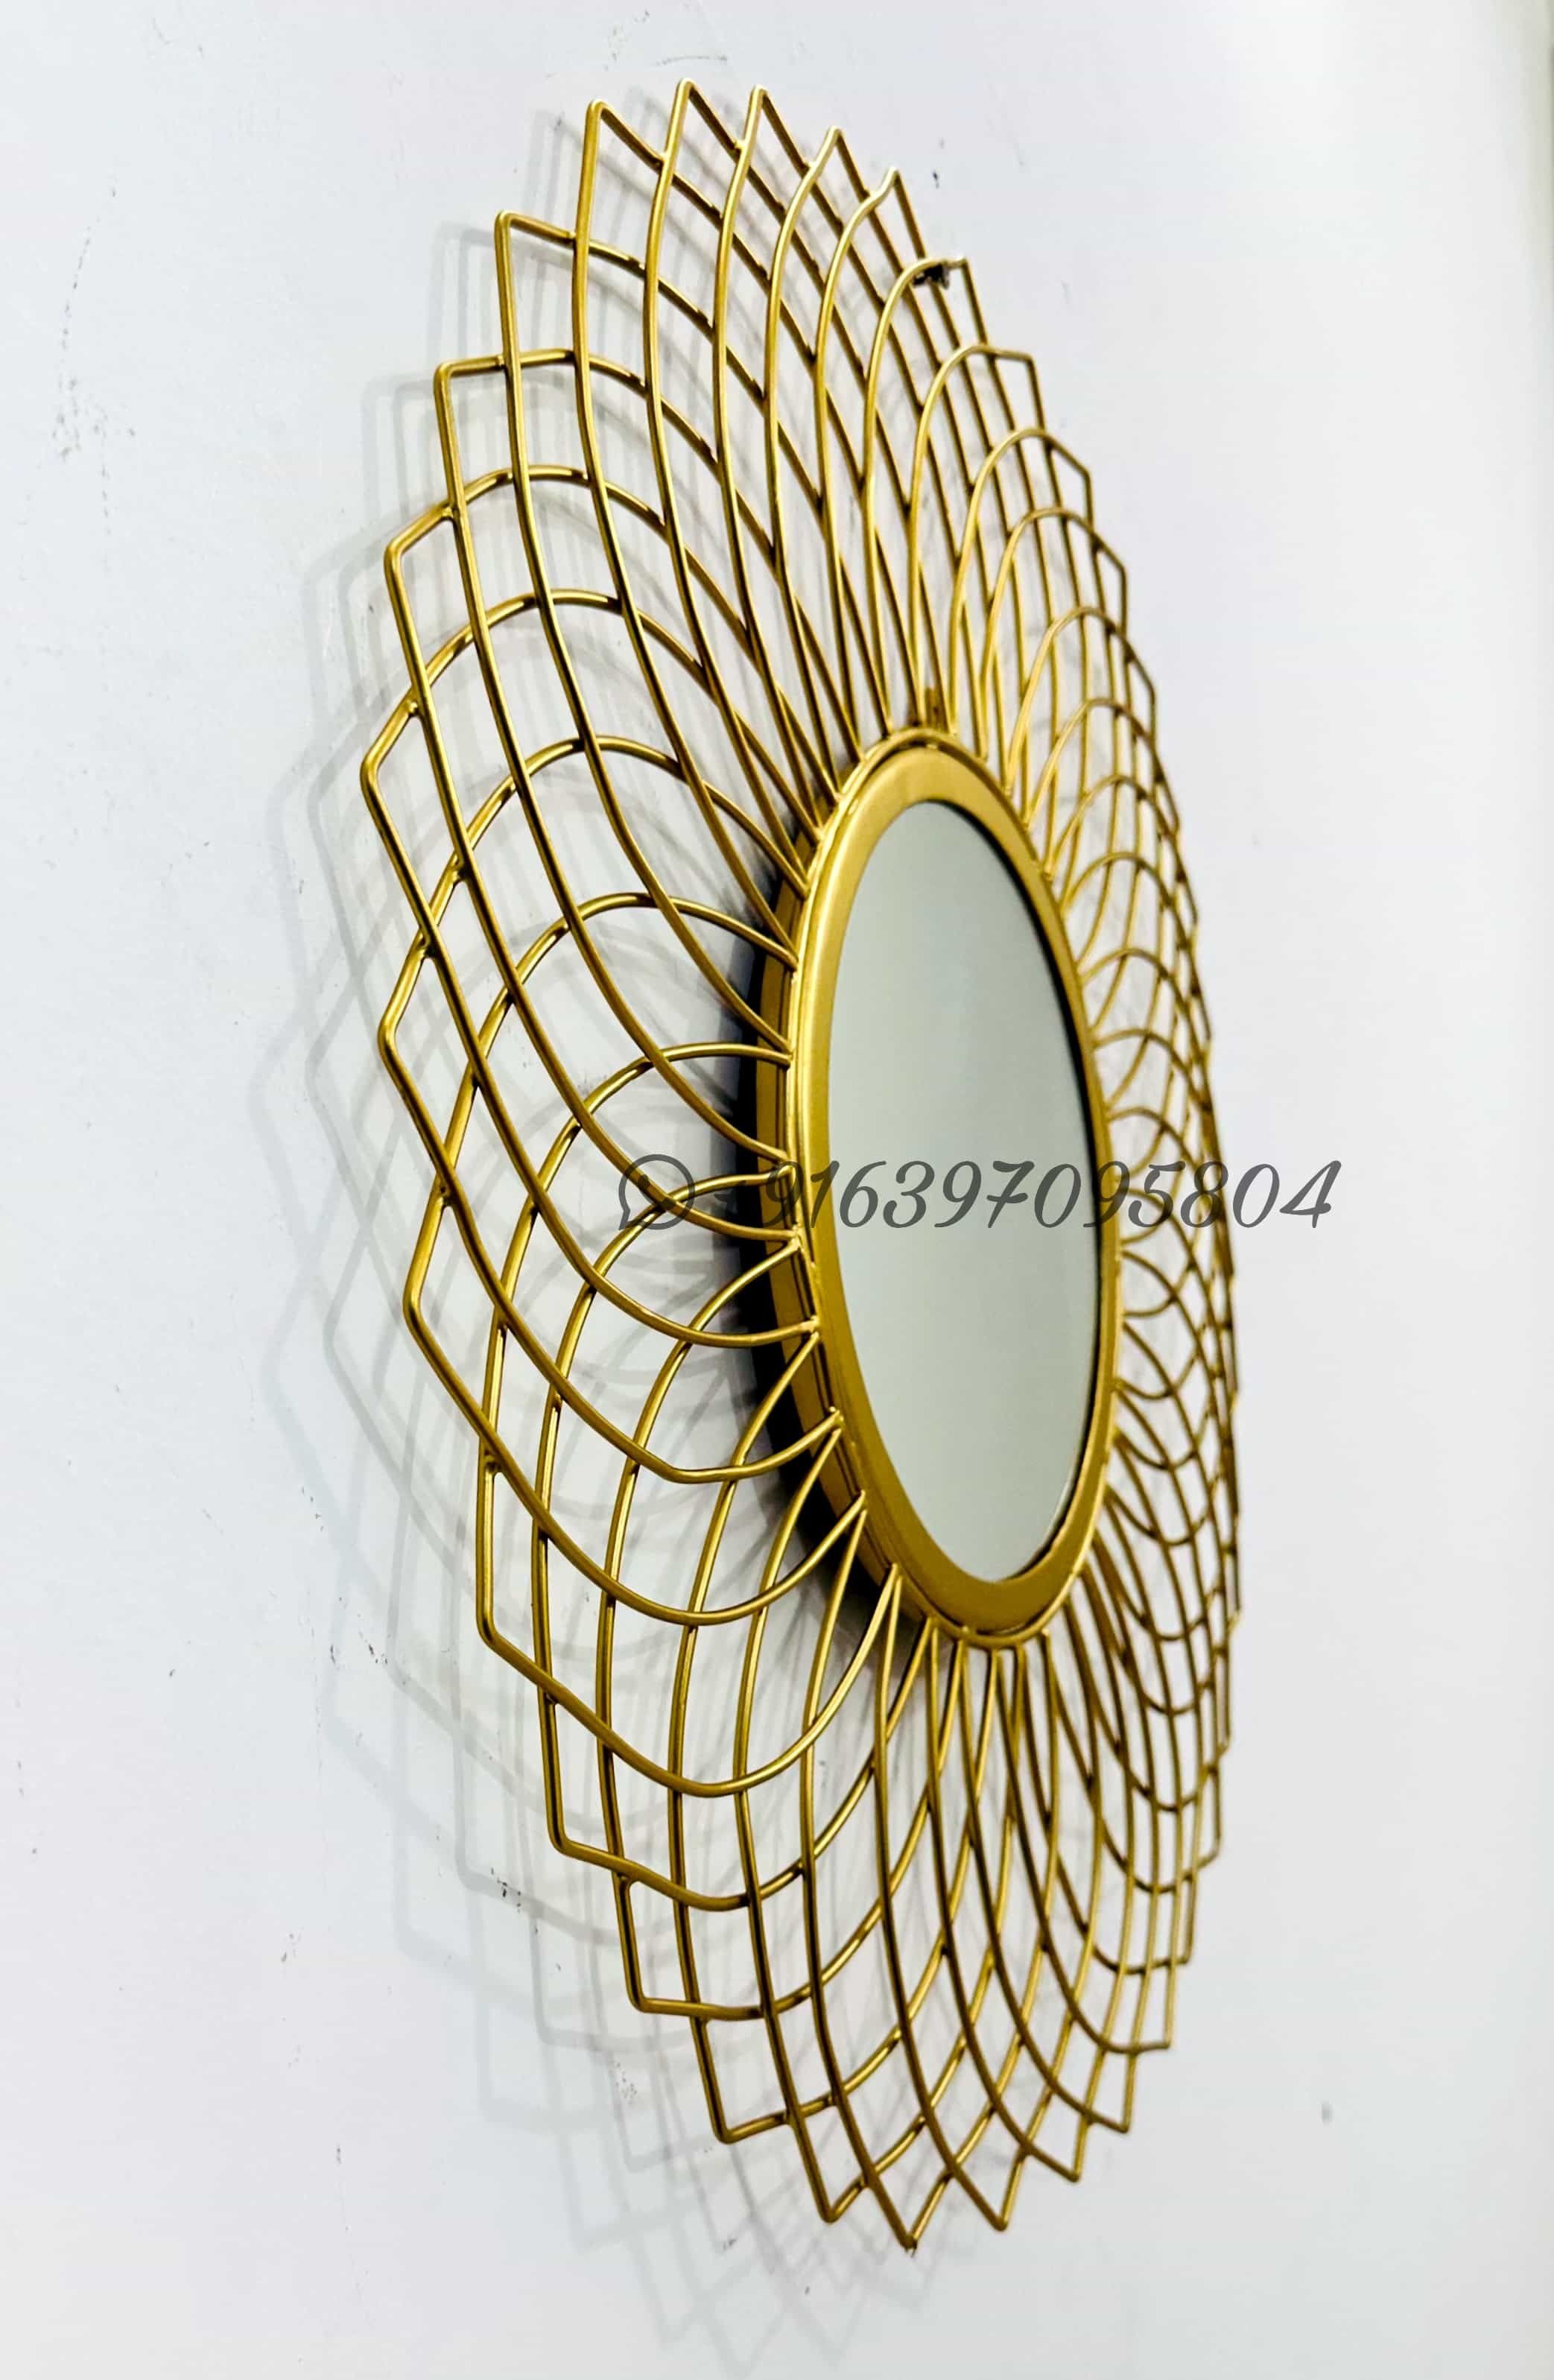 GCO Metal Wall Mirror Flower Shape in iron with Golden Powder Coated finish for home interiors